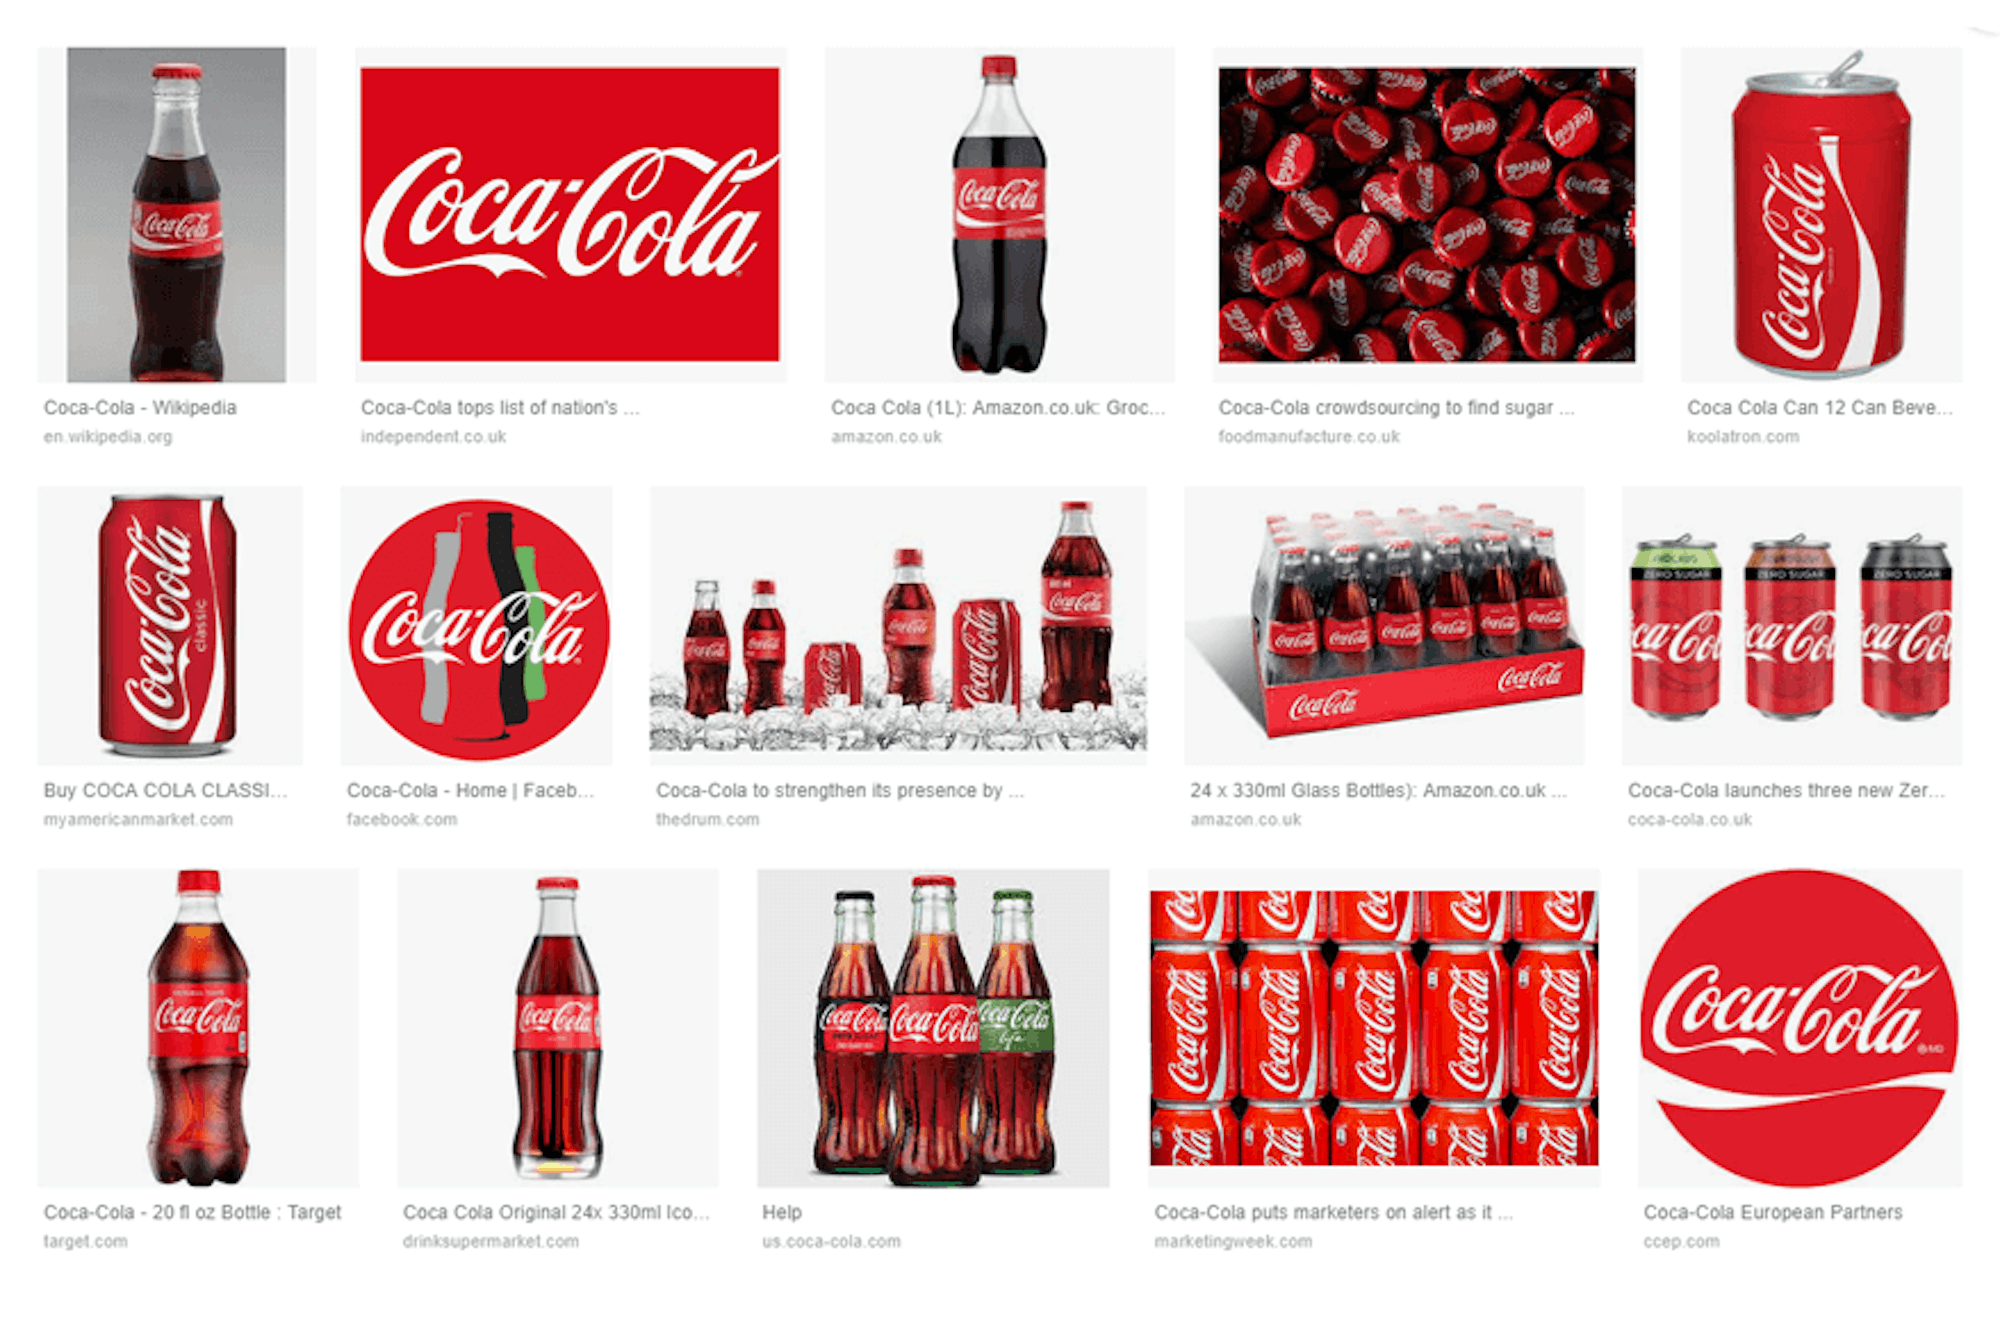 A google search for 'Coca-cola' shows how strongly associated the colour is with it's products and brand.